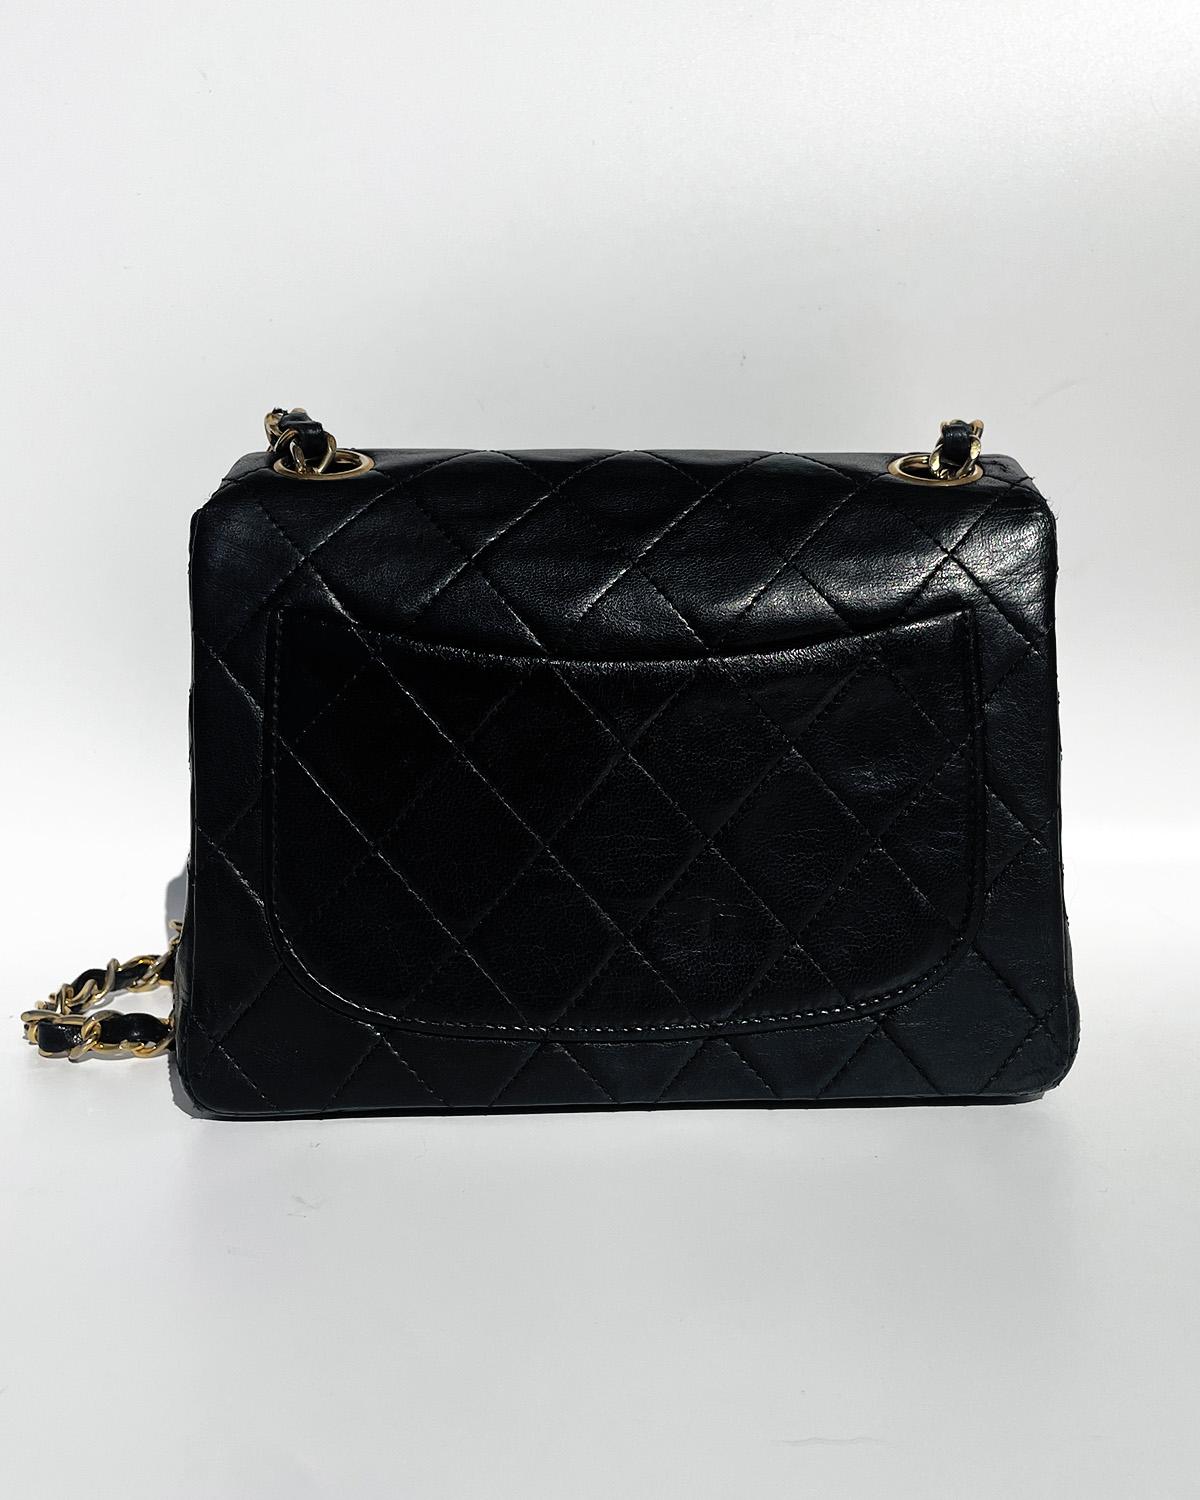 Classic Chanel Mini Timeless handbag in black quilted leather For Sale 5